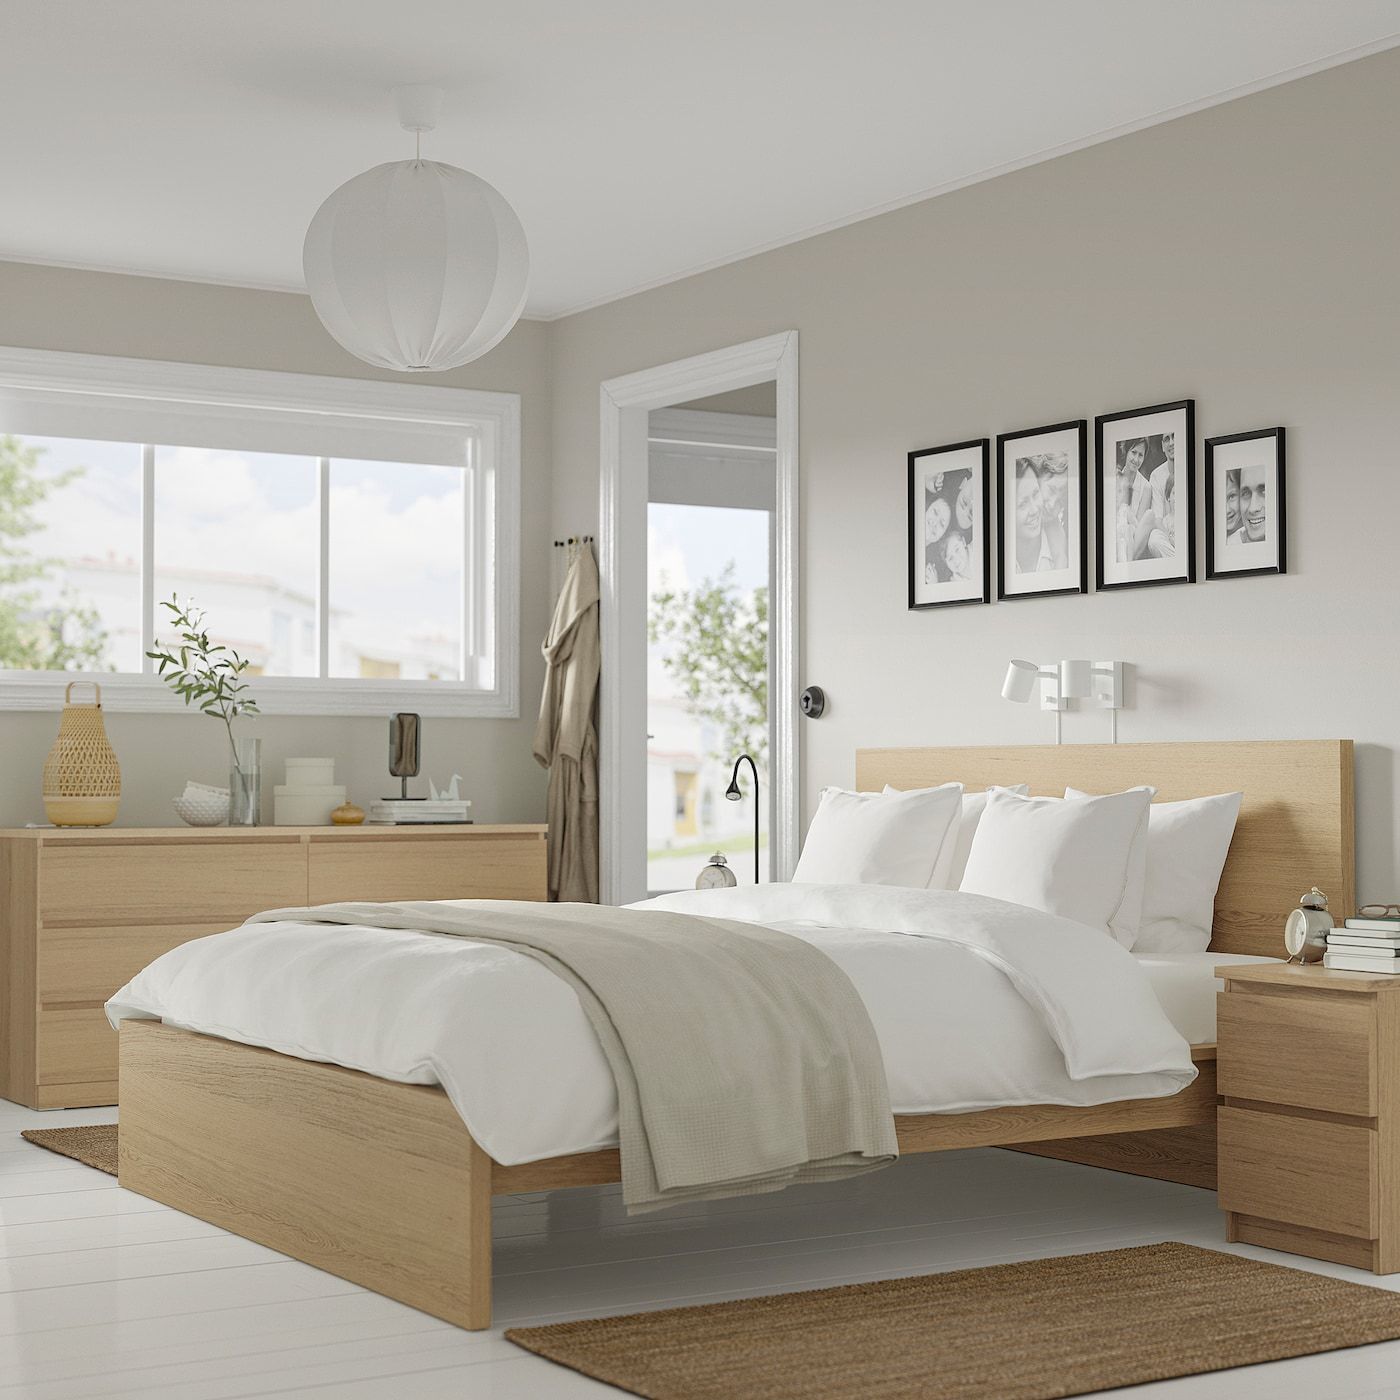 Elevate Your Room with Queen Bedroom
Furniture Sets